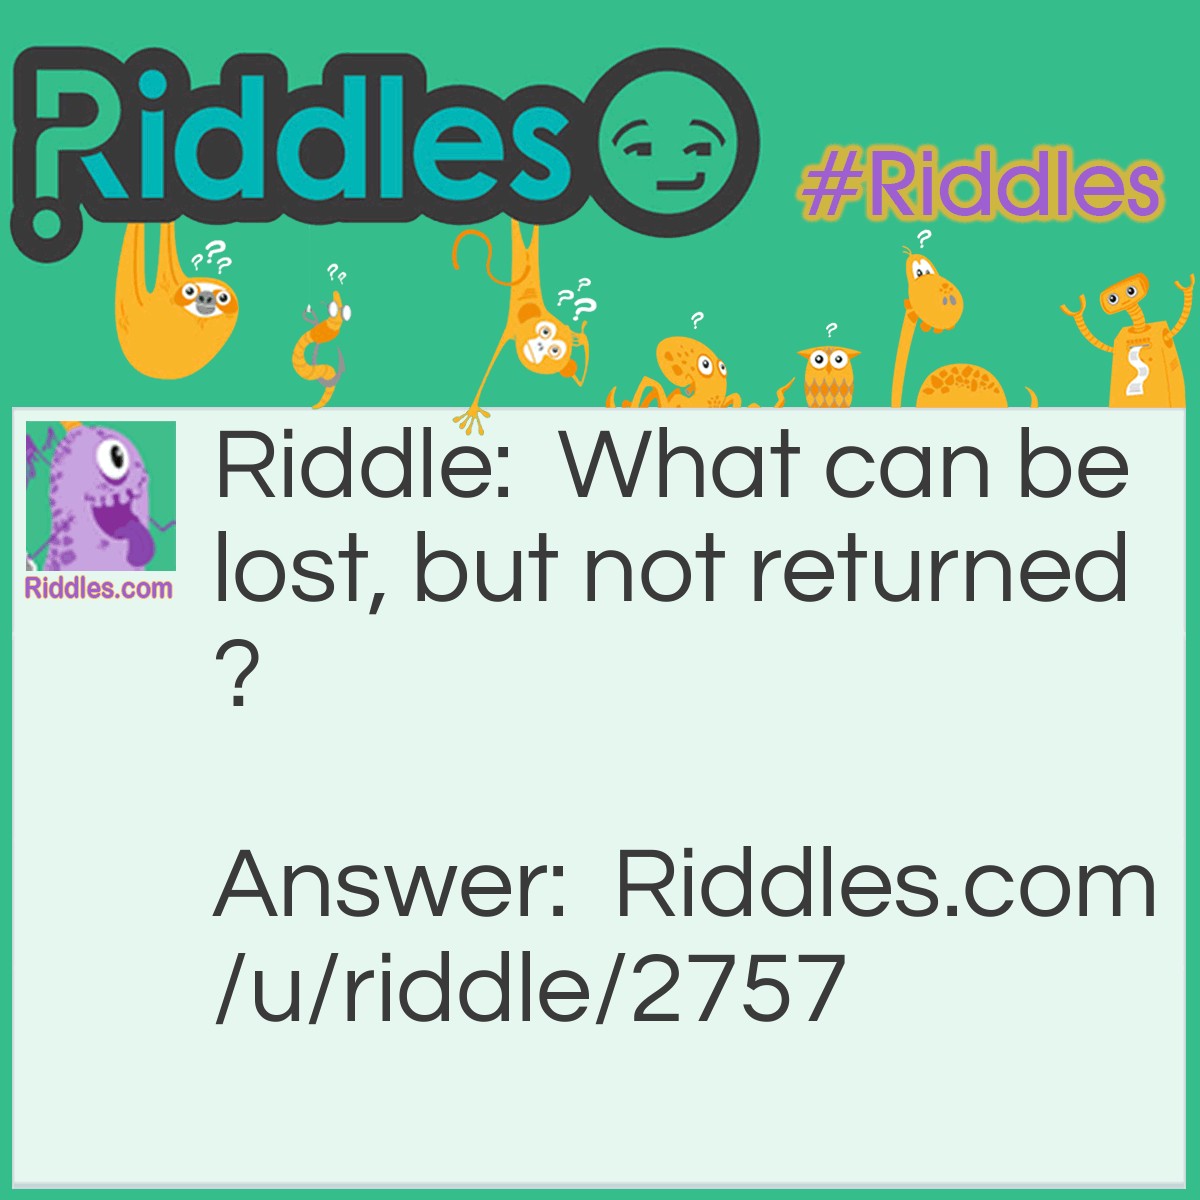 Riddle: What can be lost, but not returned? Answer: Life.